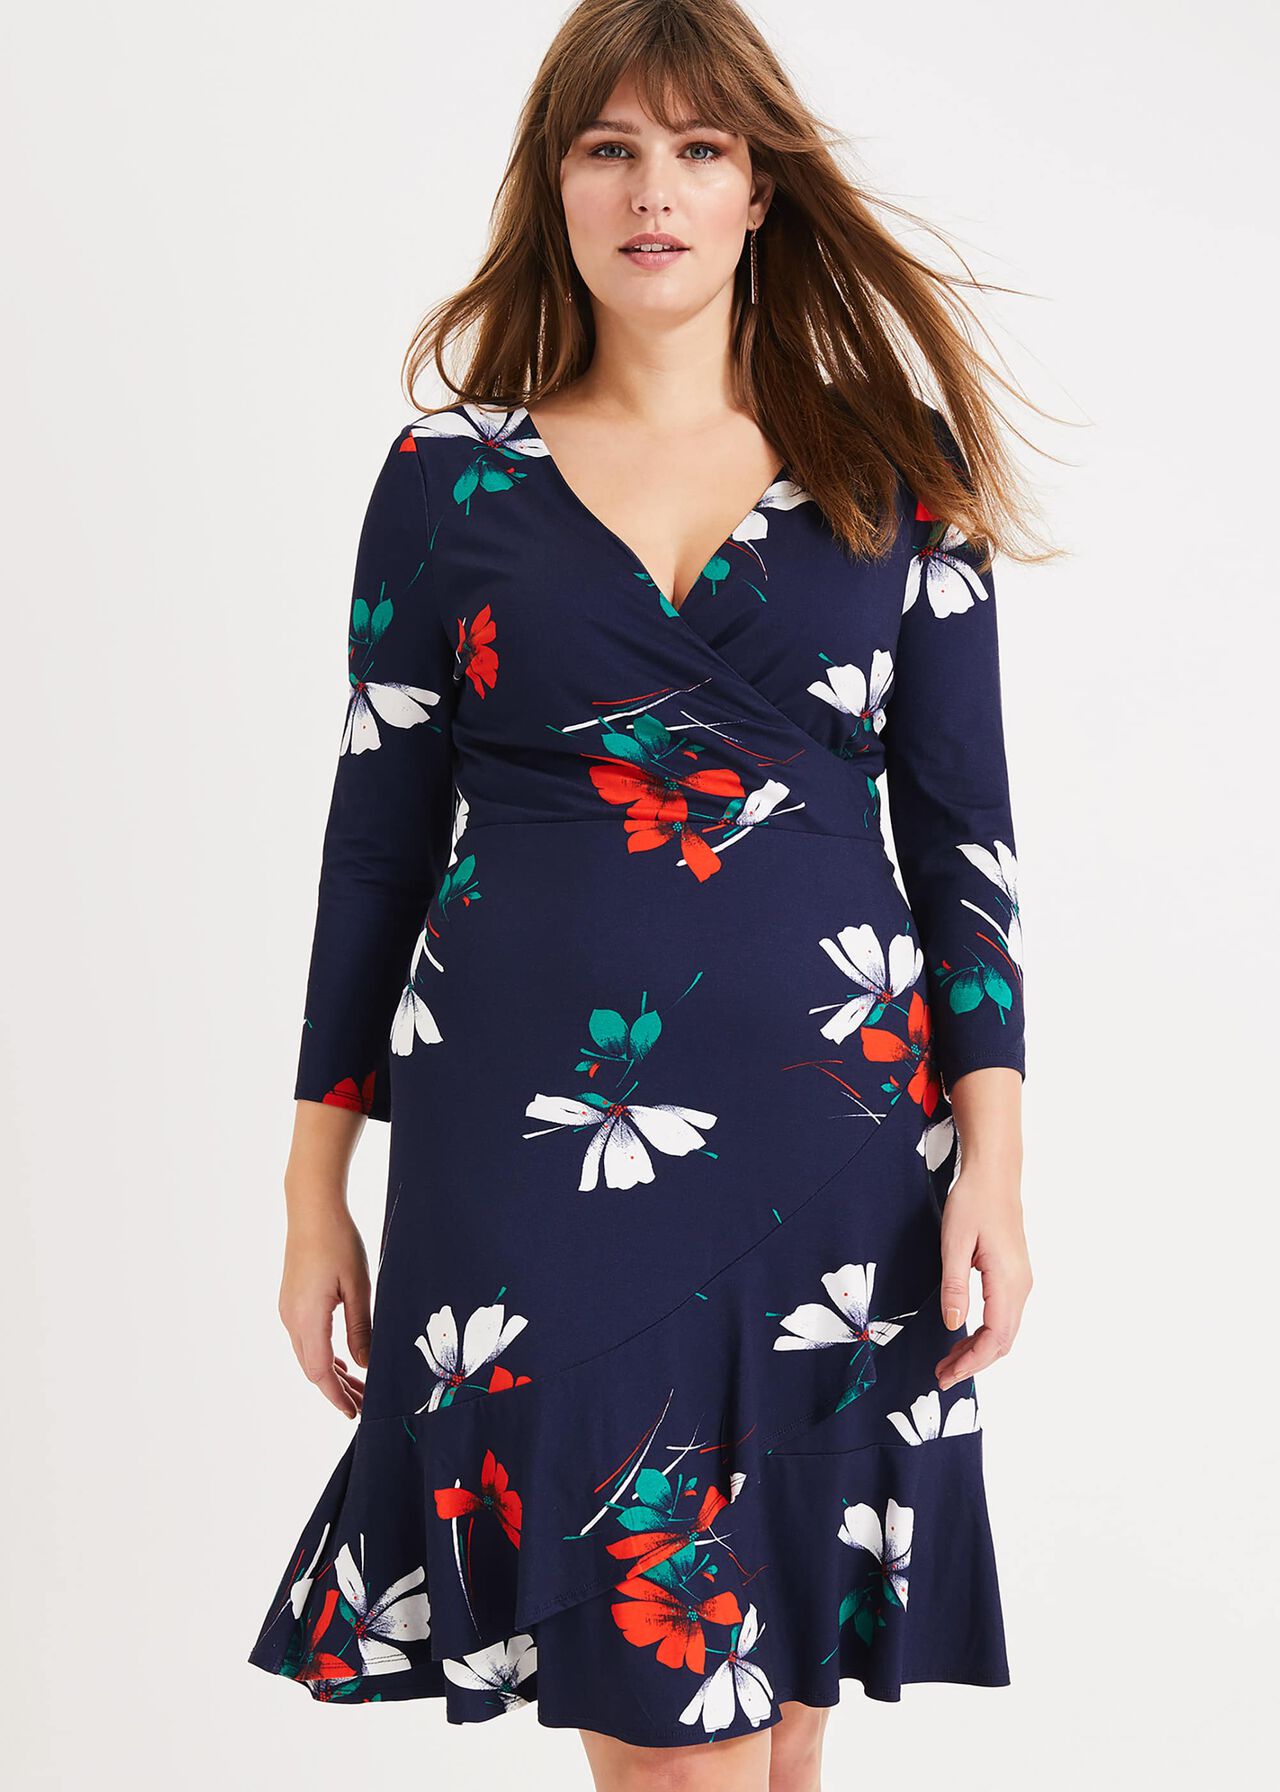 Paola Floral Printed Dress